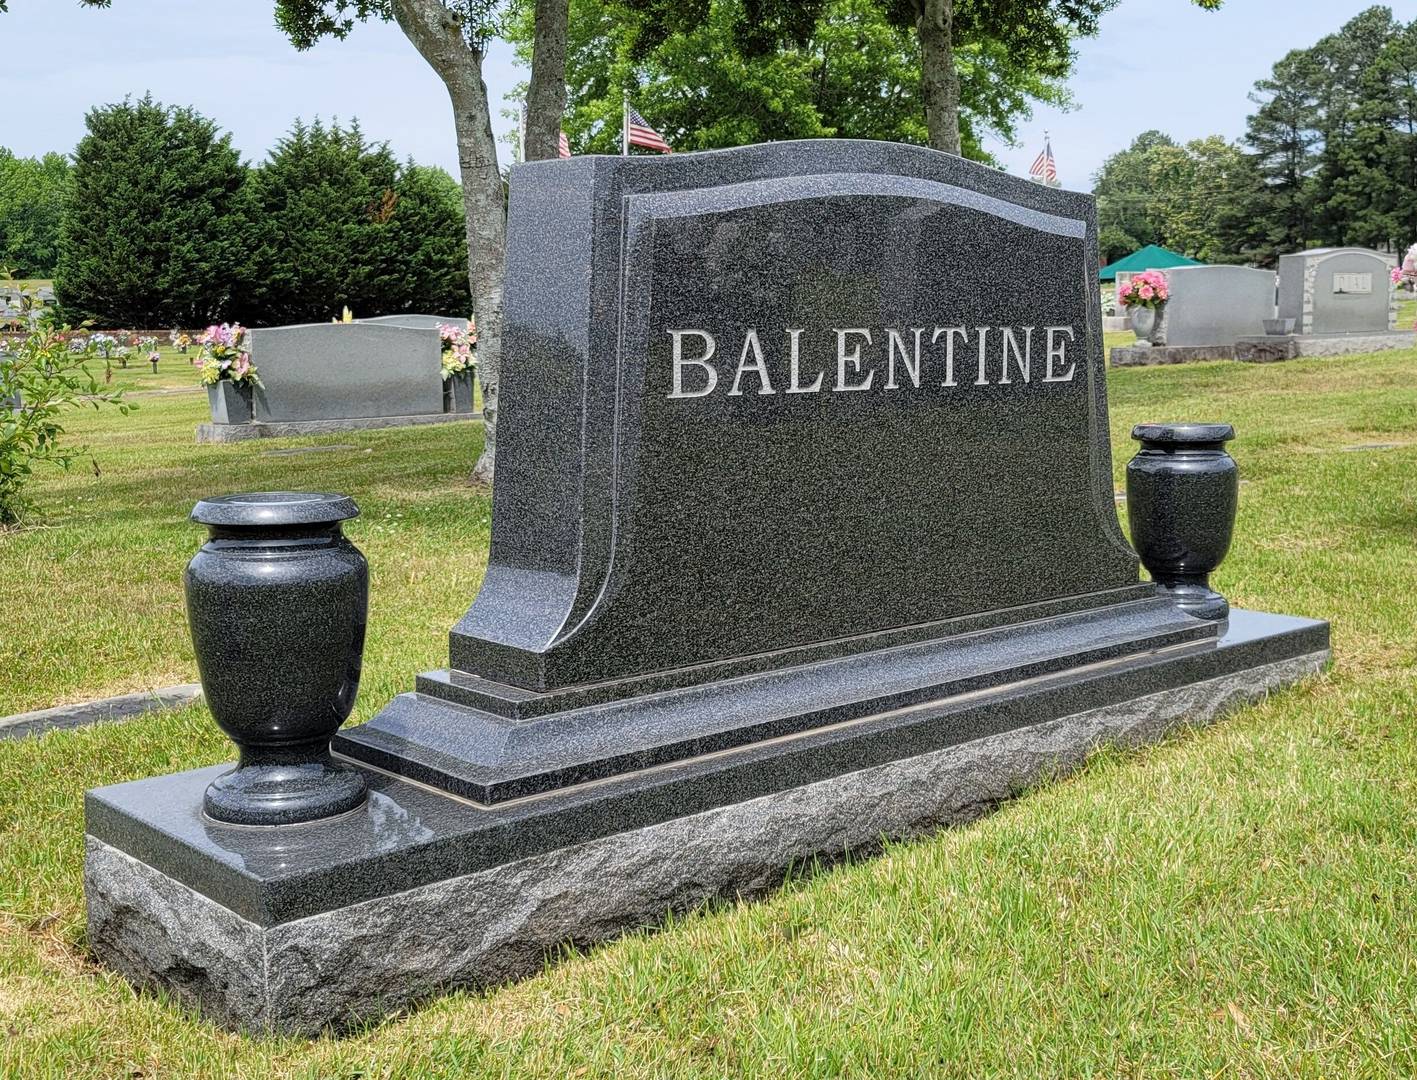 A memorial slab and tombstone with the name of Balentine